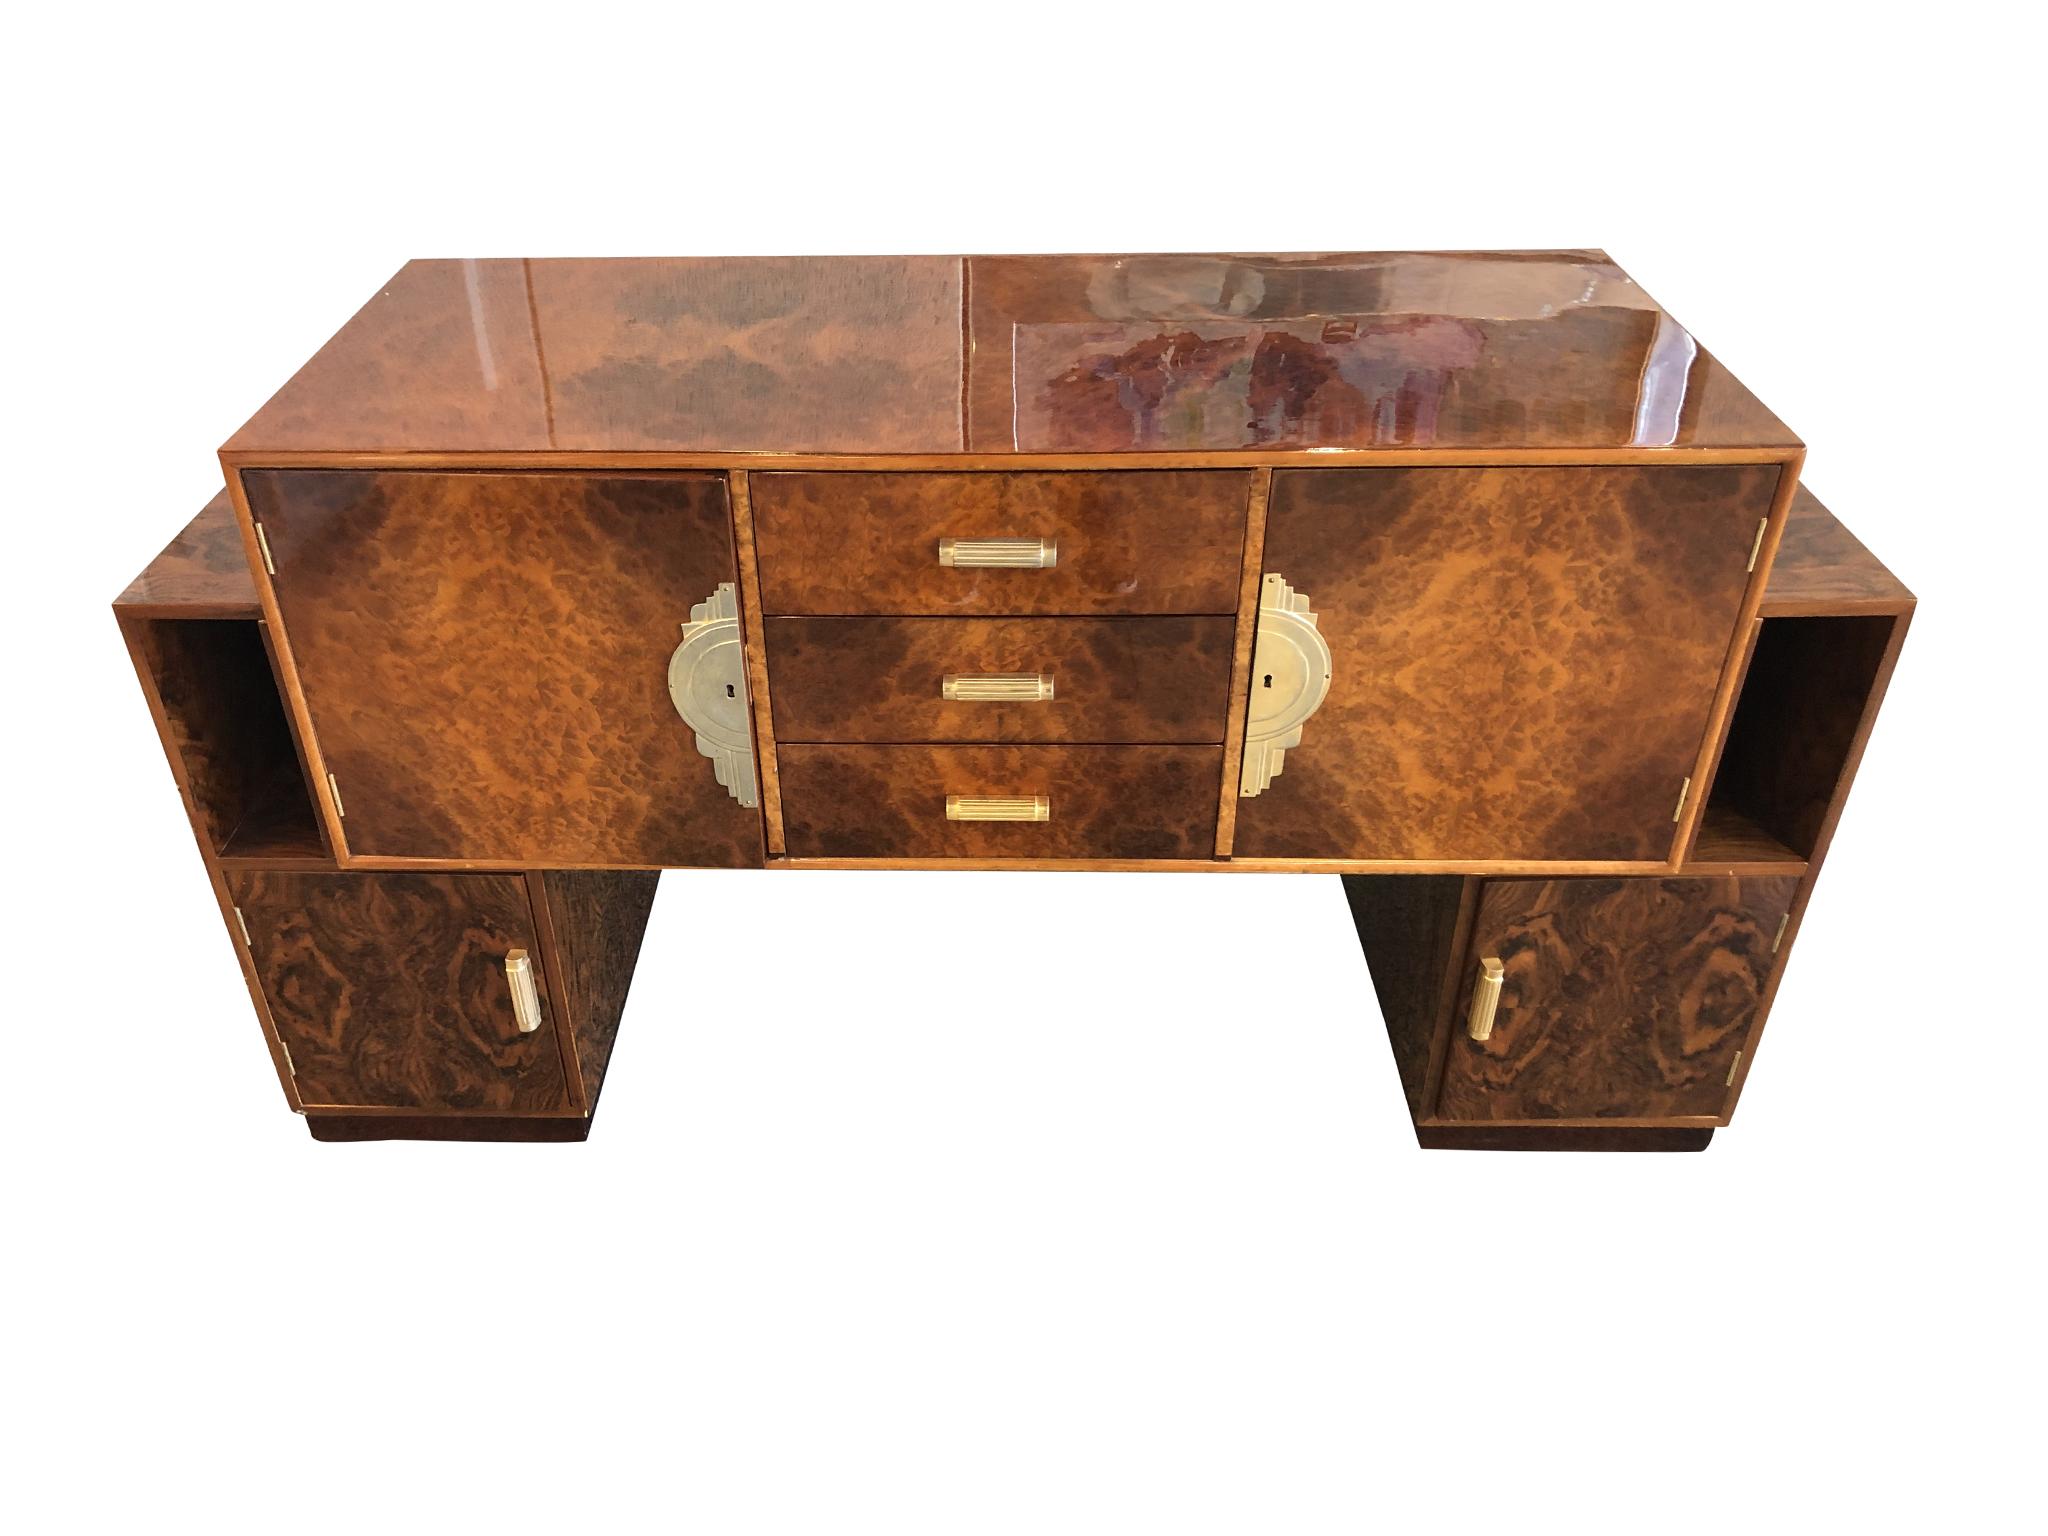 An exceptional French Art Deco sideboard cabinet crafted from burl with a lacquered finish and walnut veneer, circa 1930s. The wood has a warm honey-brown tone, while brass pulls, hinges, and trims add to the golden sheen. Its alluring grain pattern